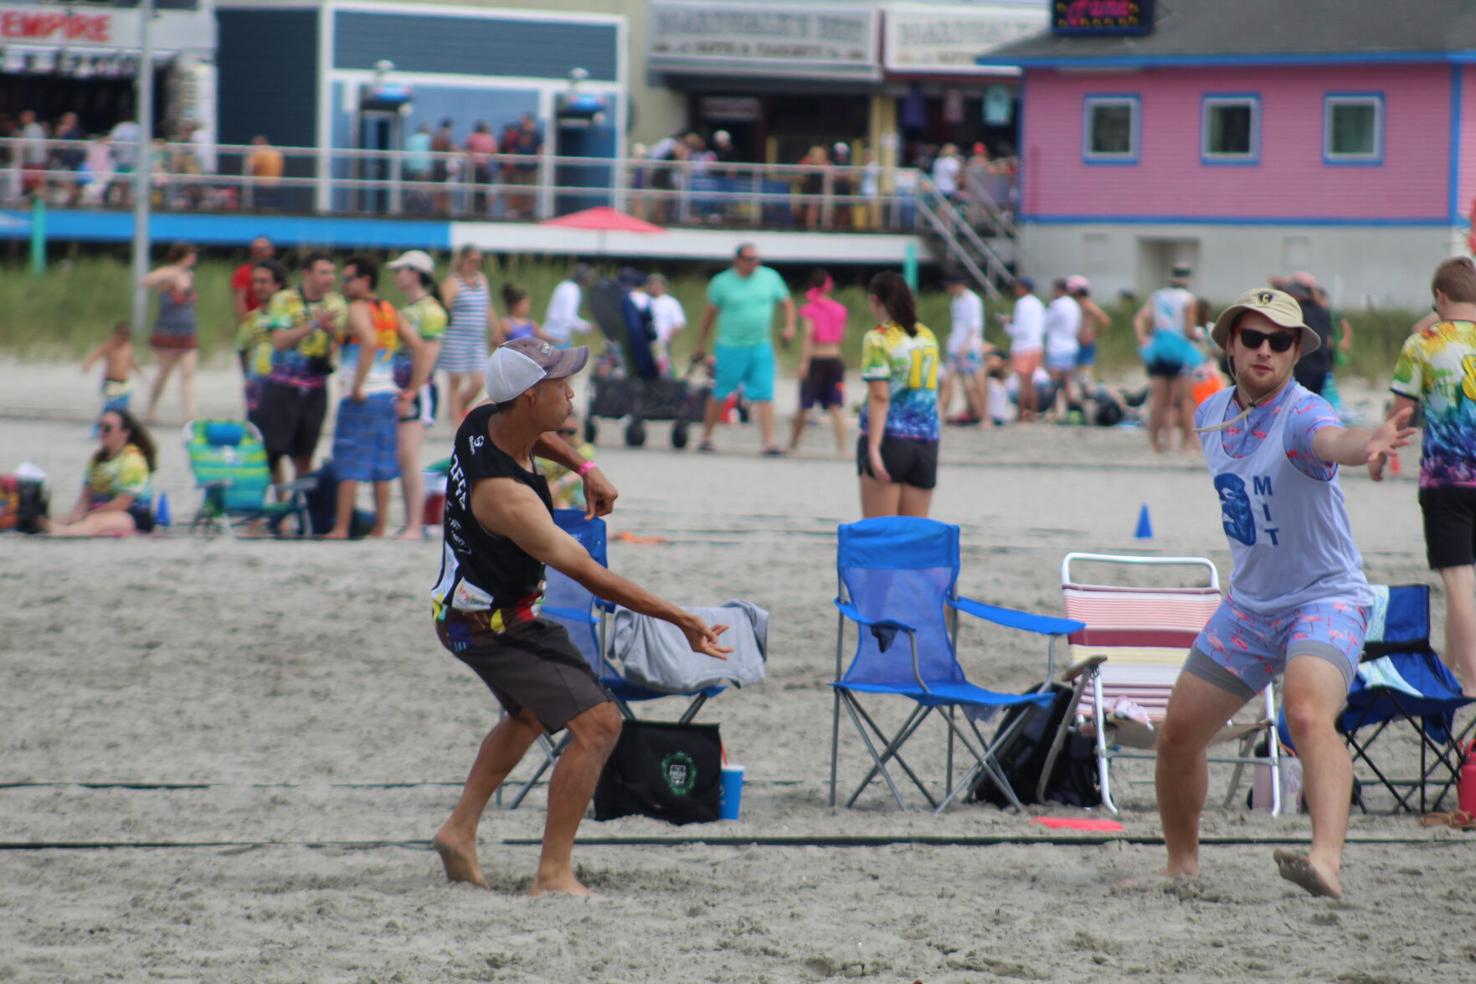 Thousands gather on Wildwood beach for ultimate frisbee tournament